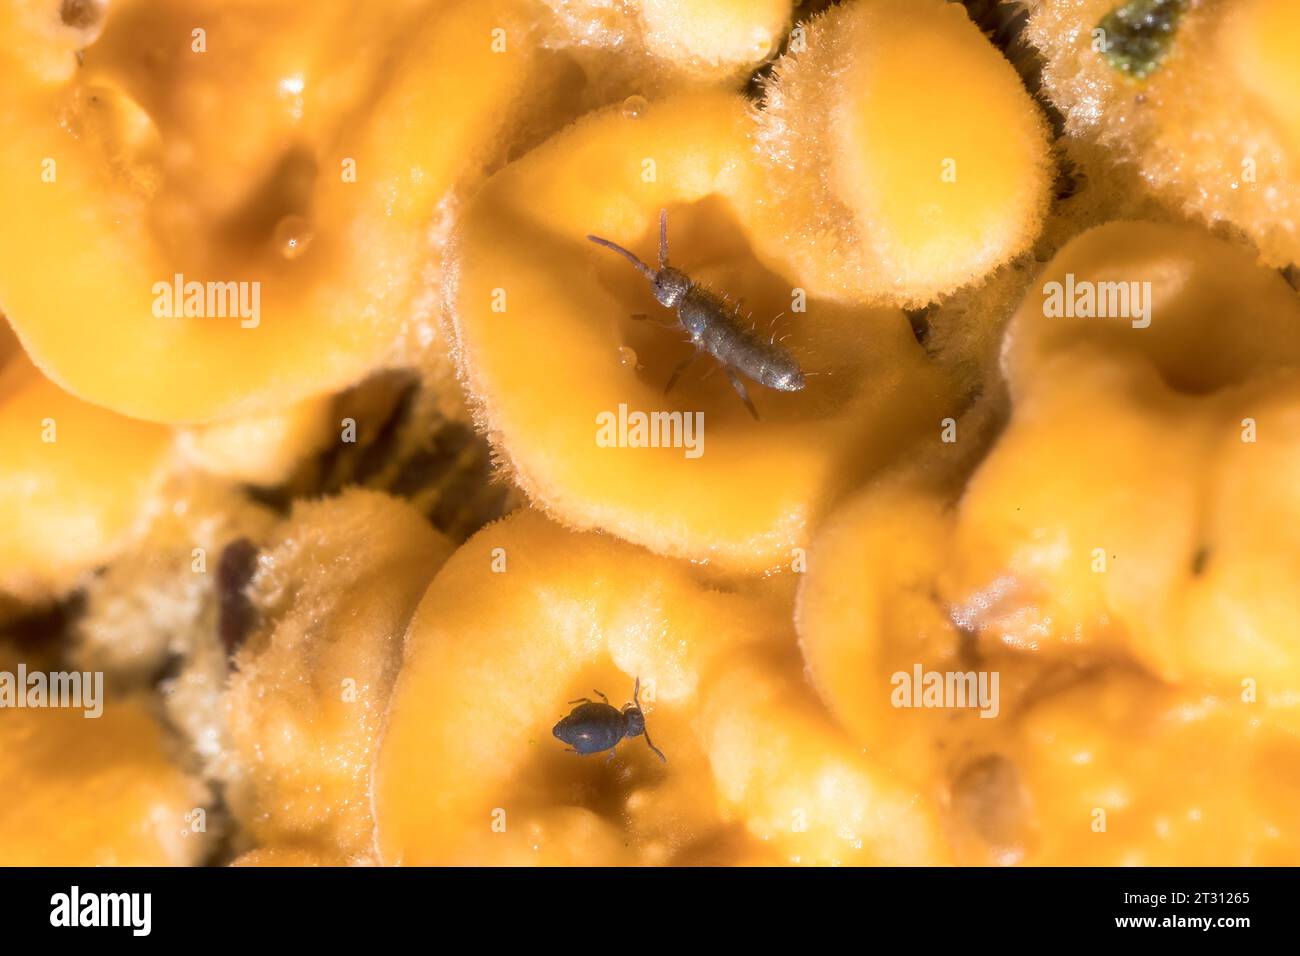 Springtails & fungi, some of the detritivores that break down organic material, recycling it and driving the nutrient cycle: a key ecosystem process. Stock Photo